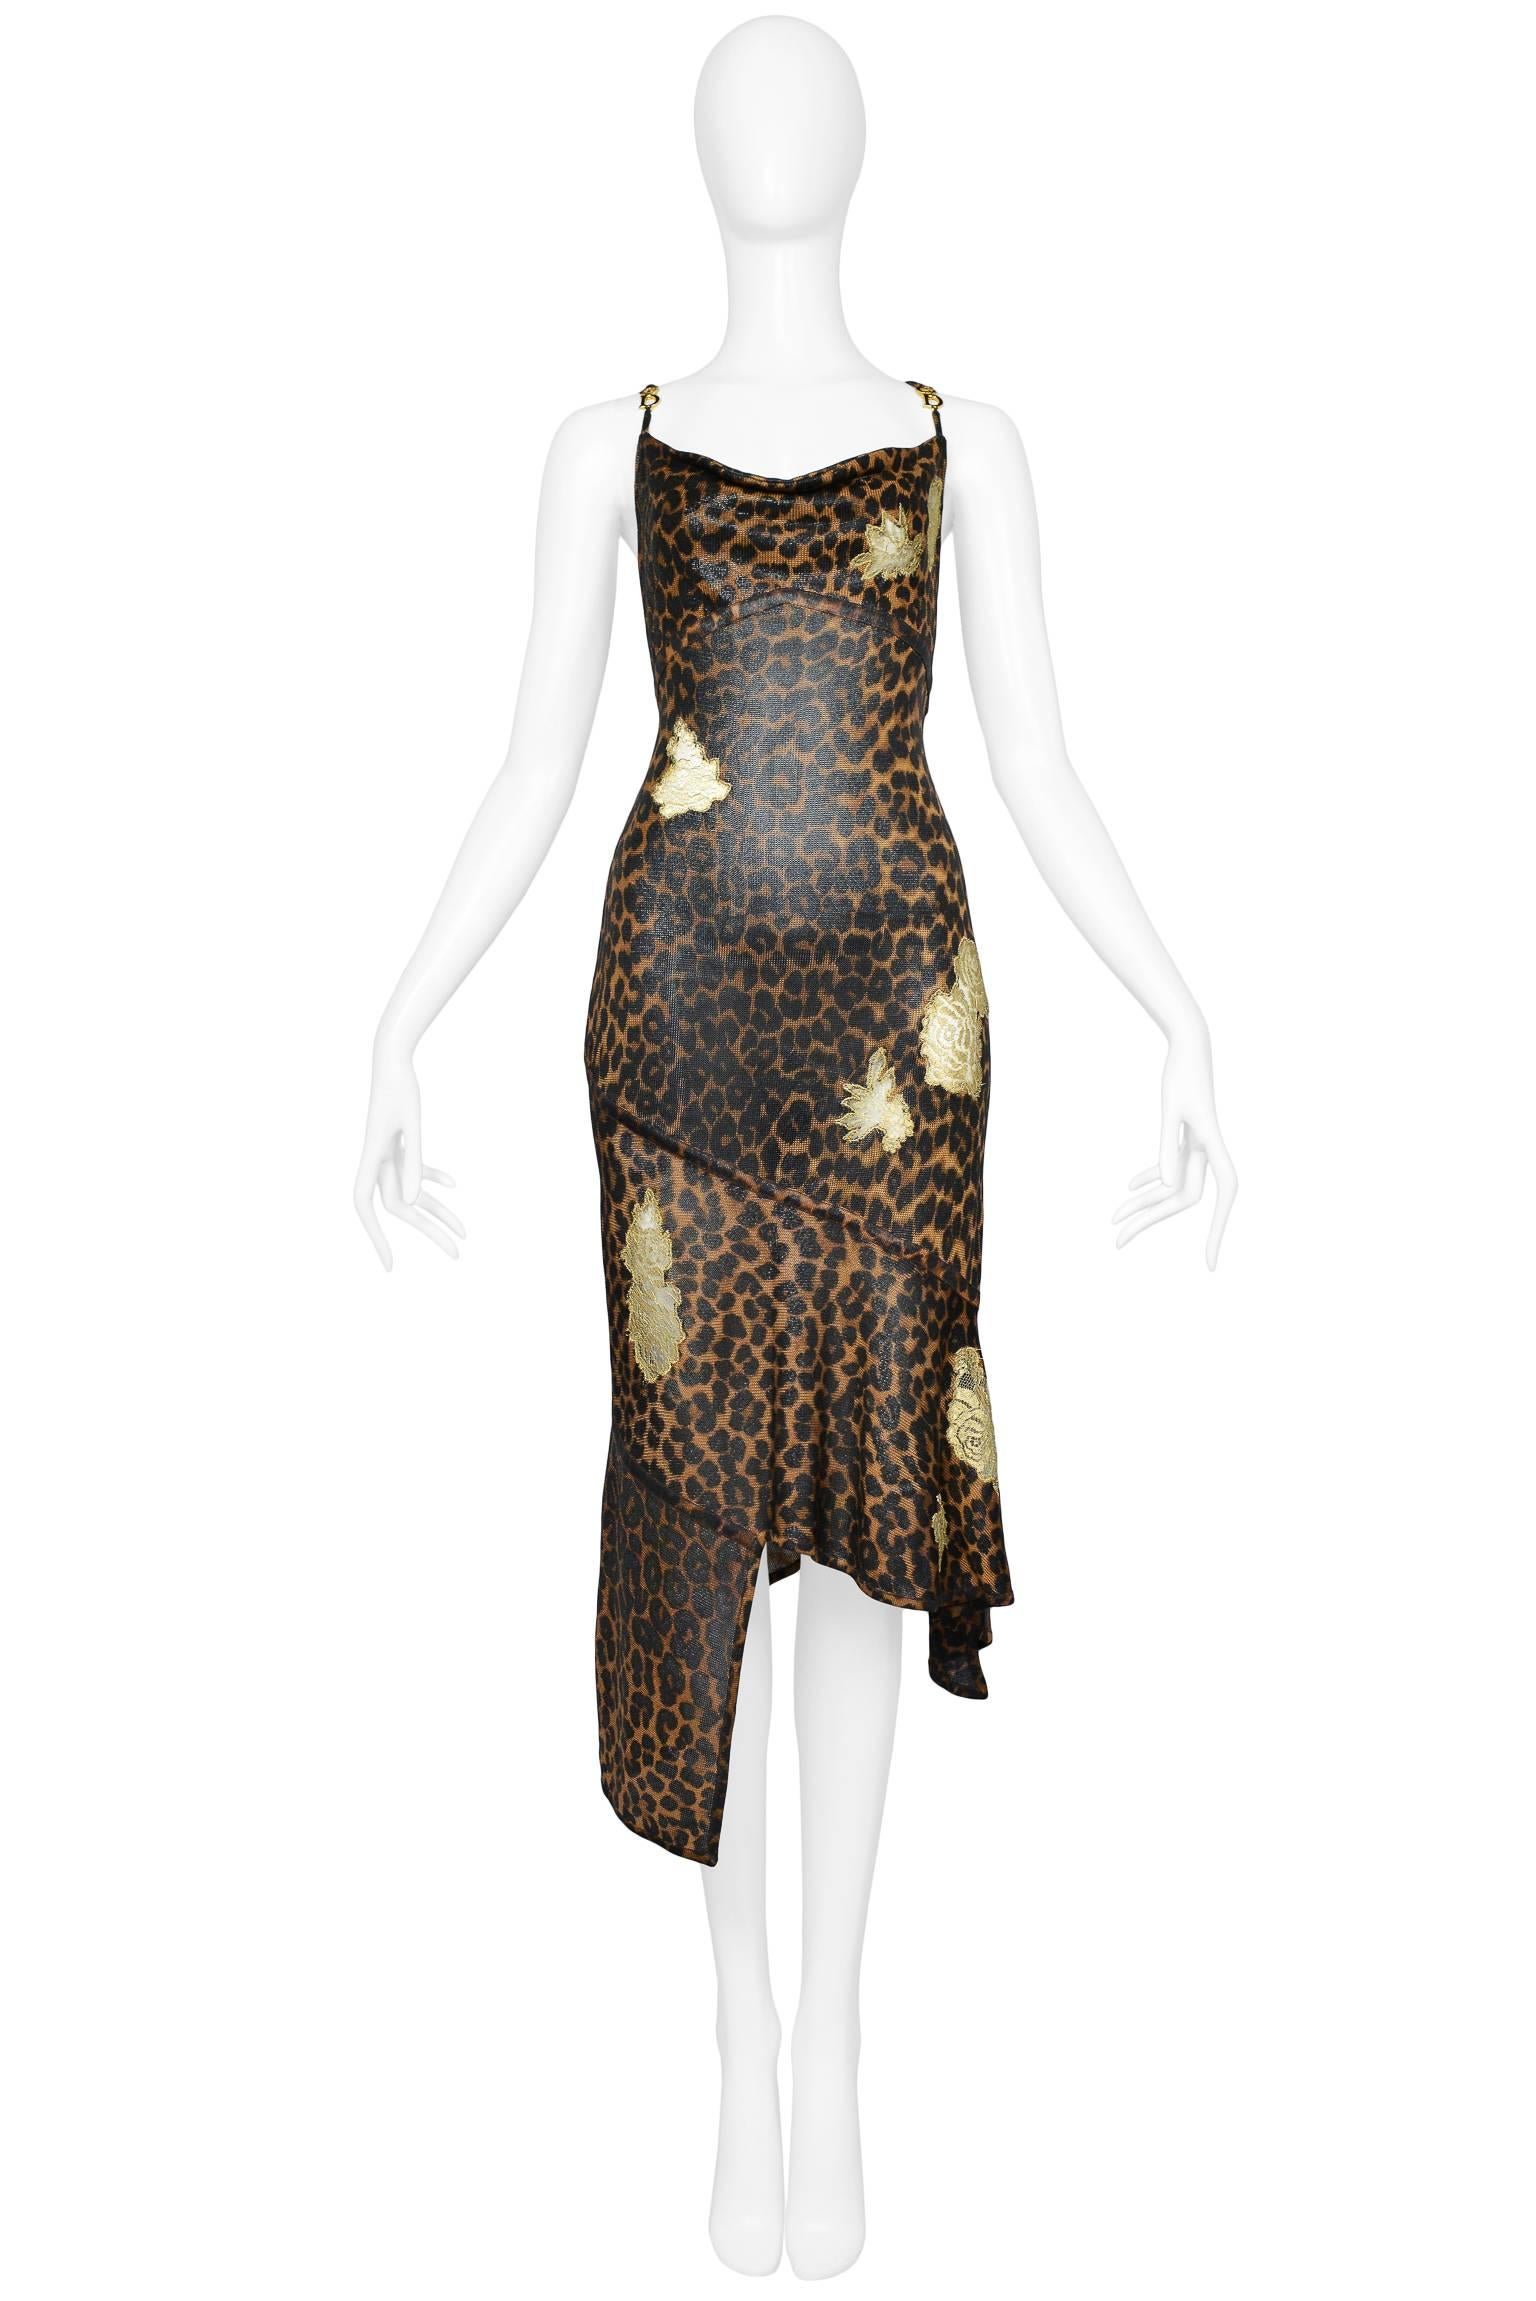 A fabulous Dior by John Galliano metallic leopard print knit body-con dress with gold tone "CD" charms at straps, gold floral lace appliques throughout, fitted bodice, and asymmetrical bandage hem. Collection AW 2000. 